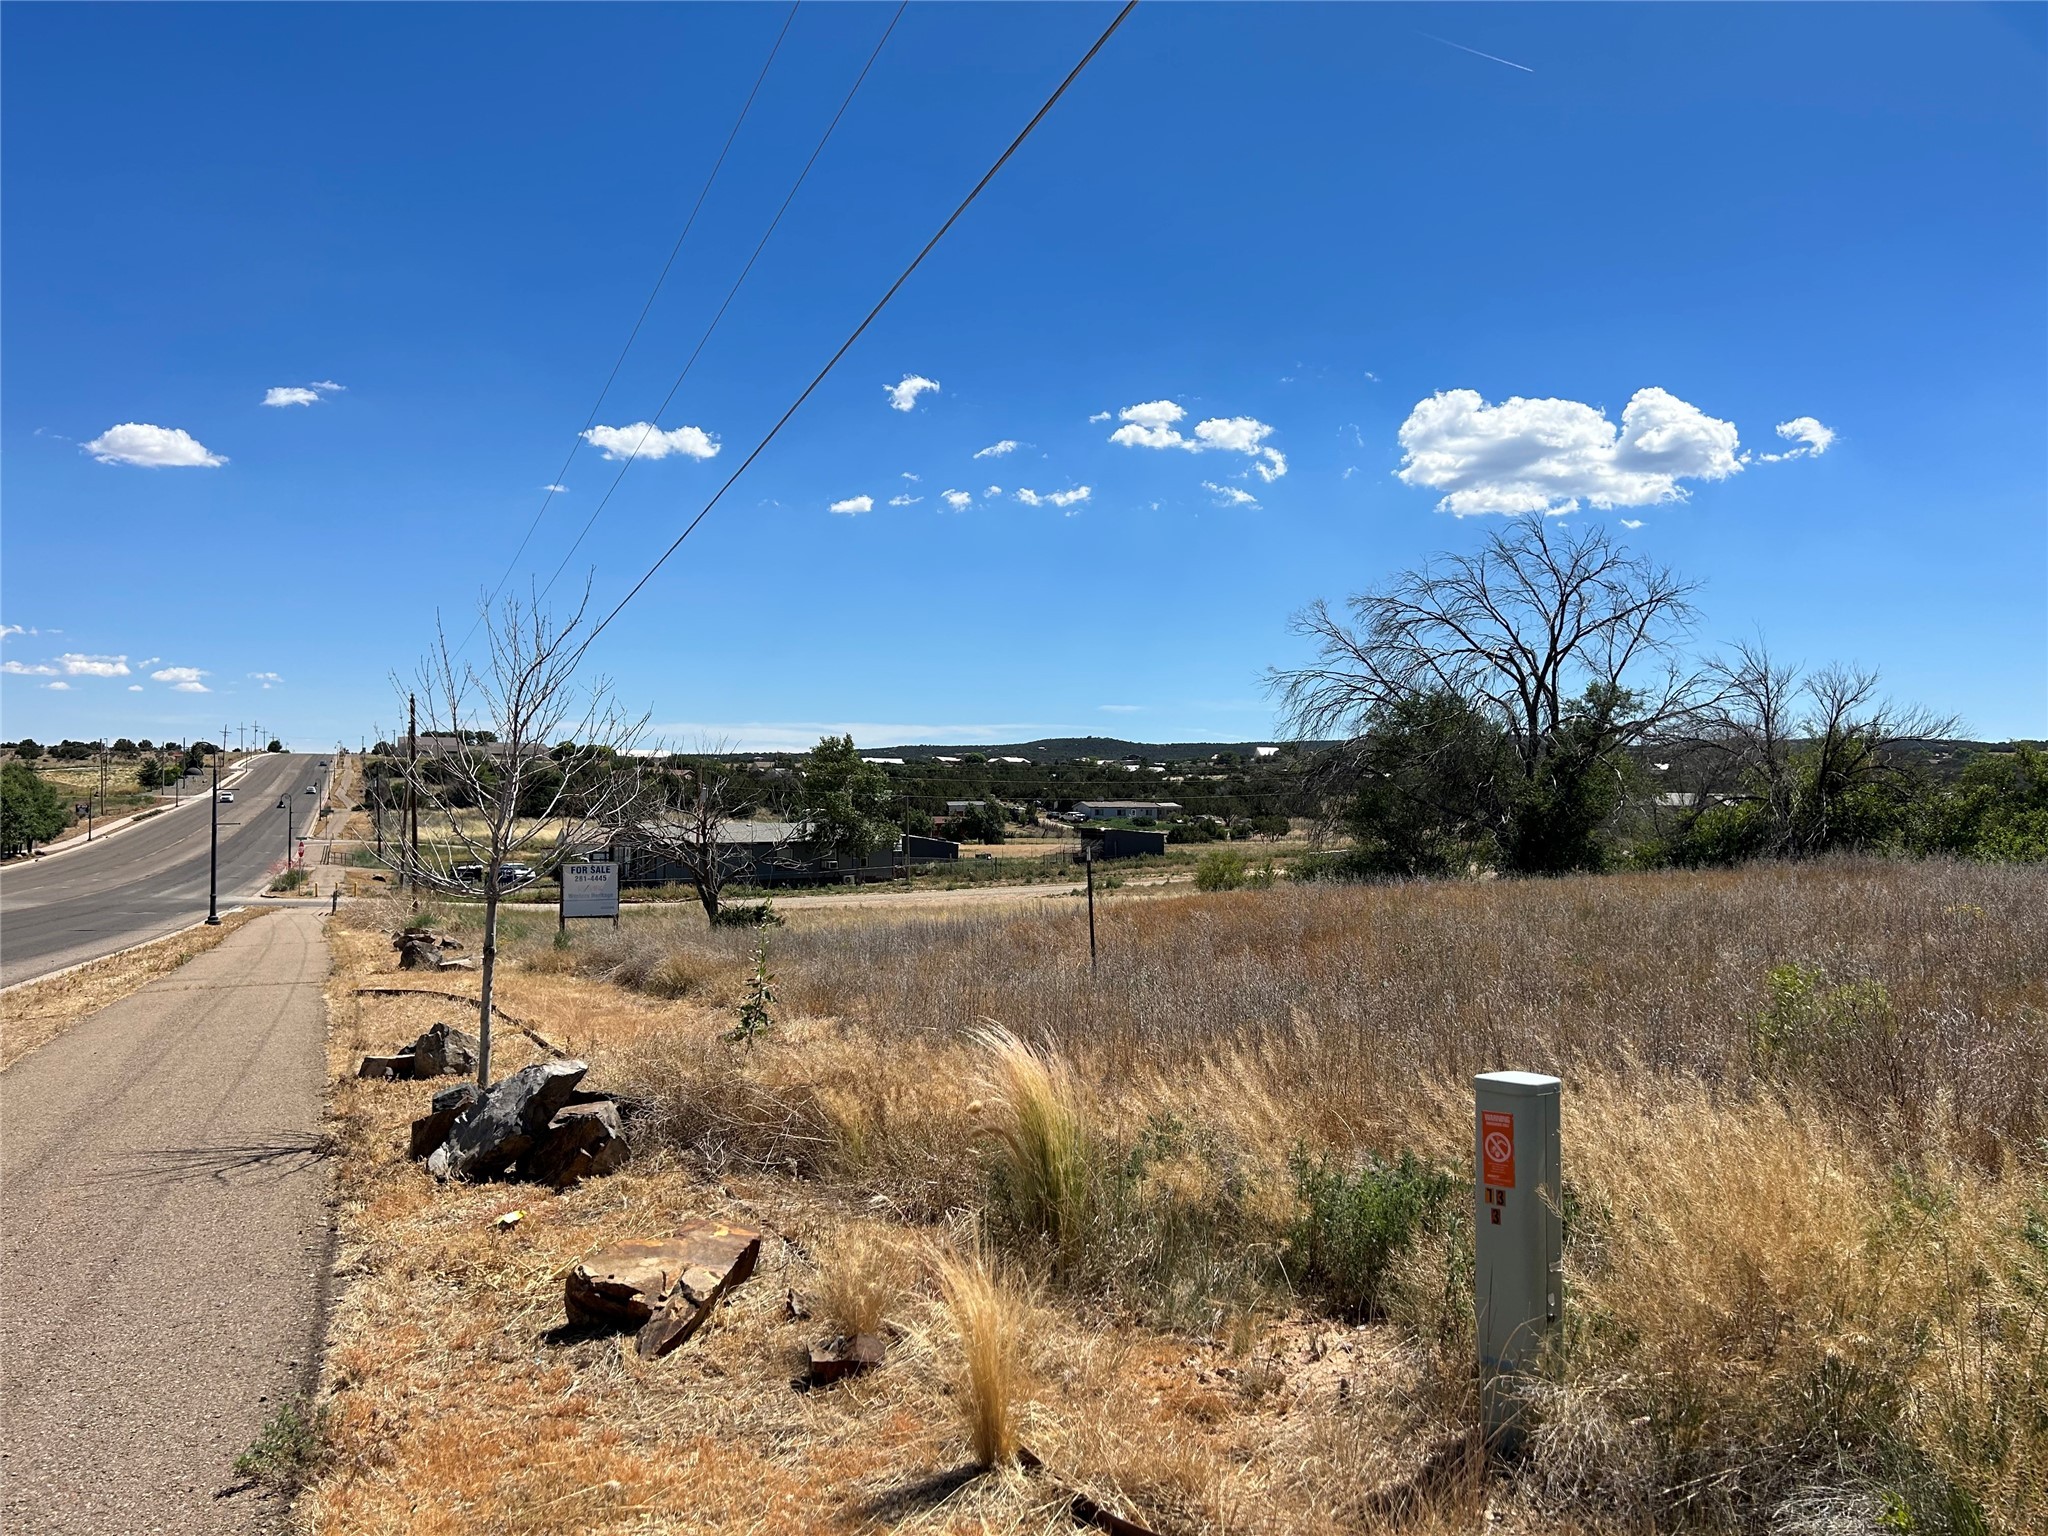 1 Mustang Road, Edgewood, New Mexico 87015, ,Land,For Sale,1 Mustang Road,202339093